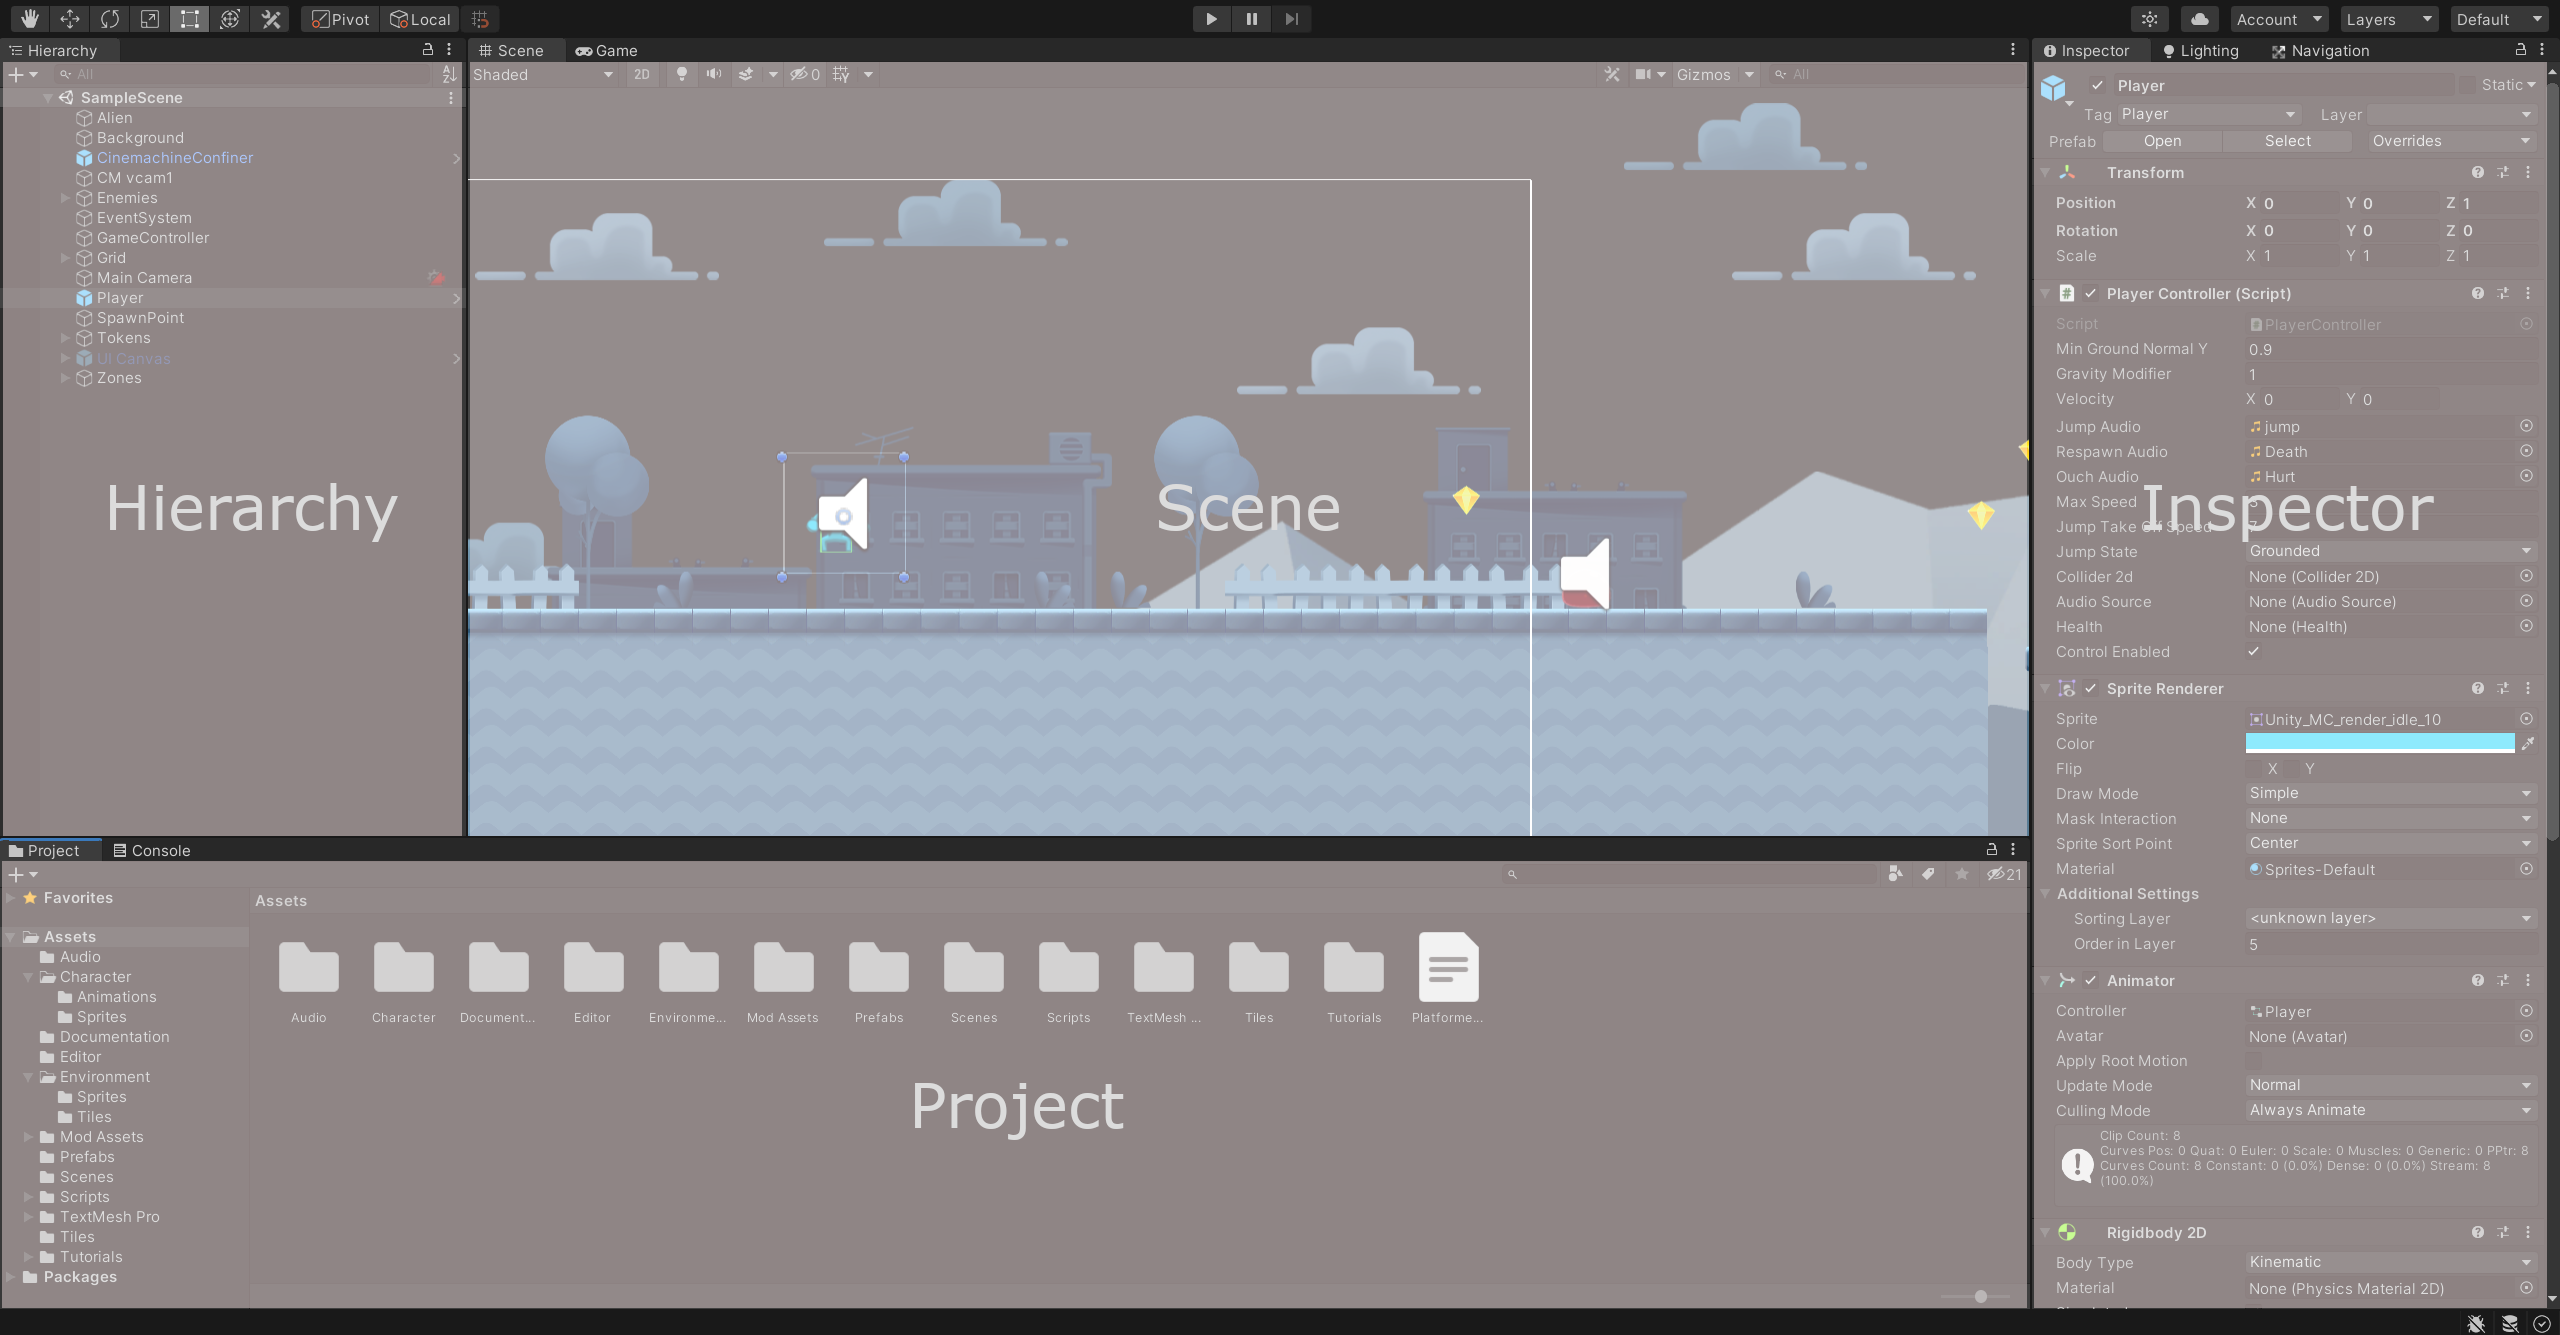 A labeled screenshot of the standard Unity layout, showing all major windows we will be discussing below.